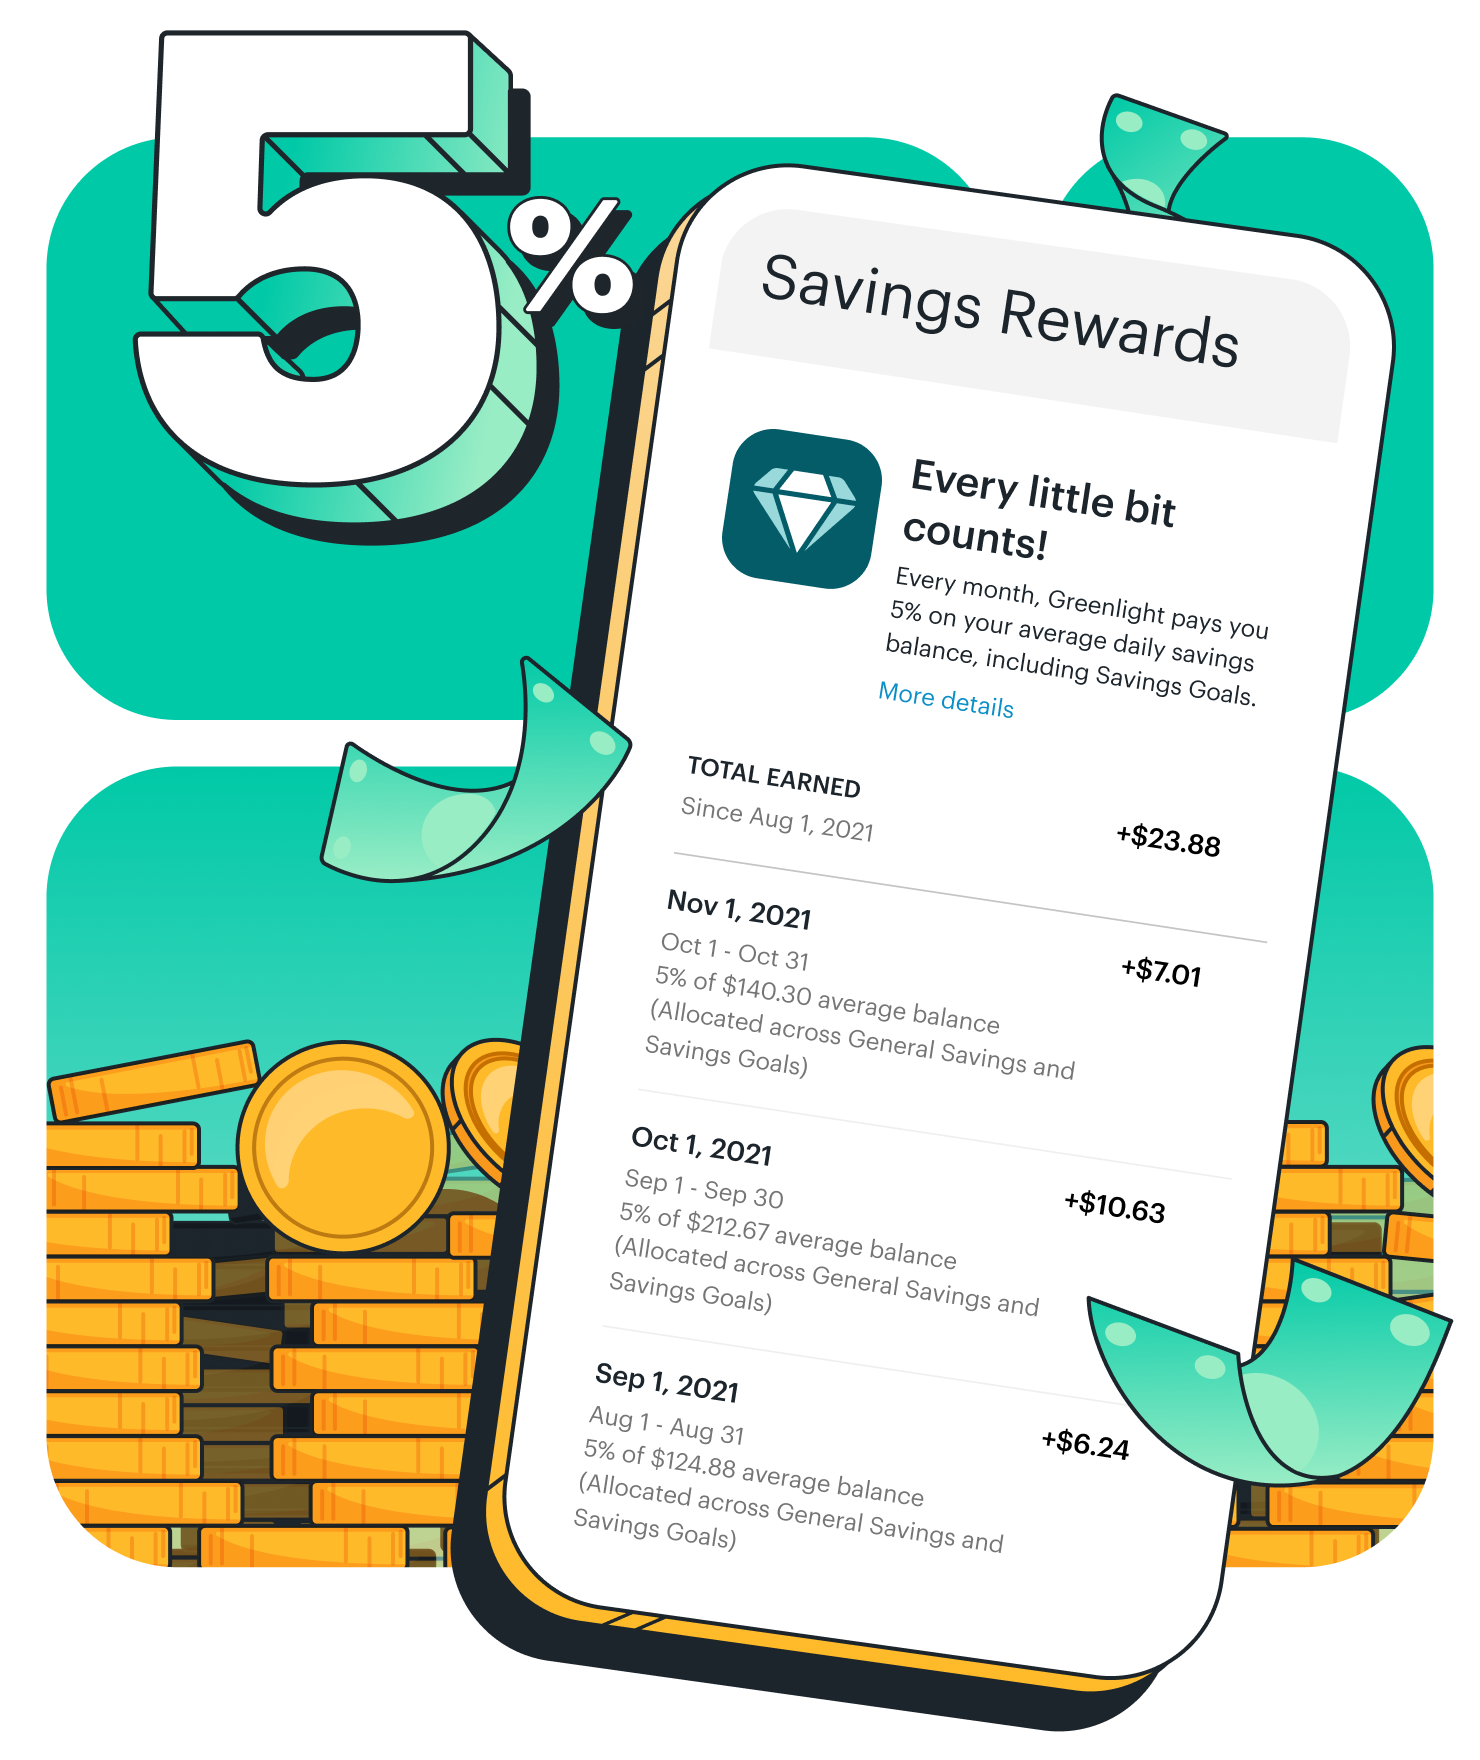 5% savings rewards for kids and teens when they set saving goals in Greenlight banking app.